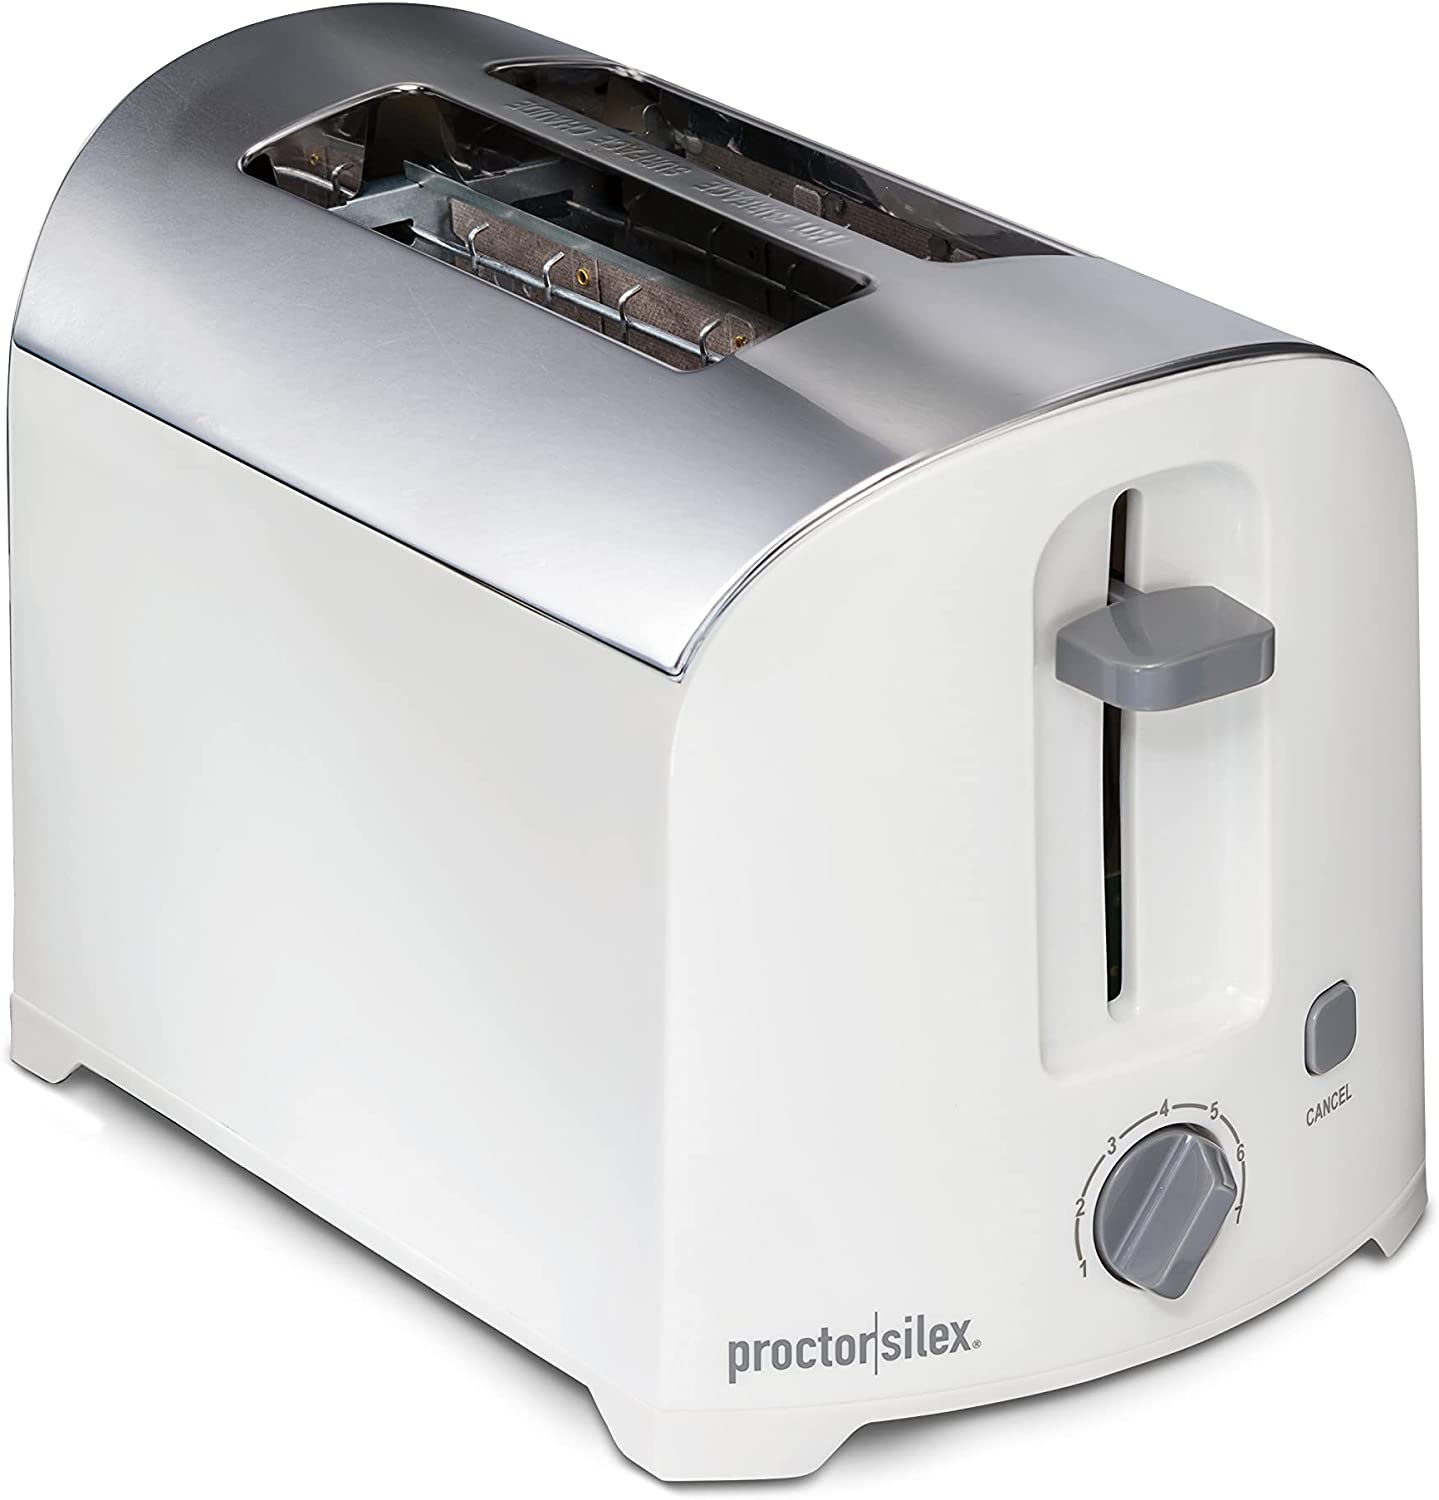 Proctor Silex 22632 2 Slice Toaster - Pre Owned